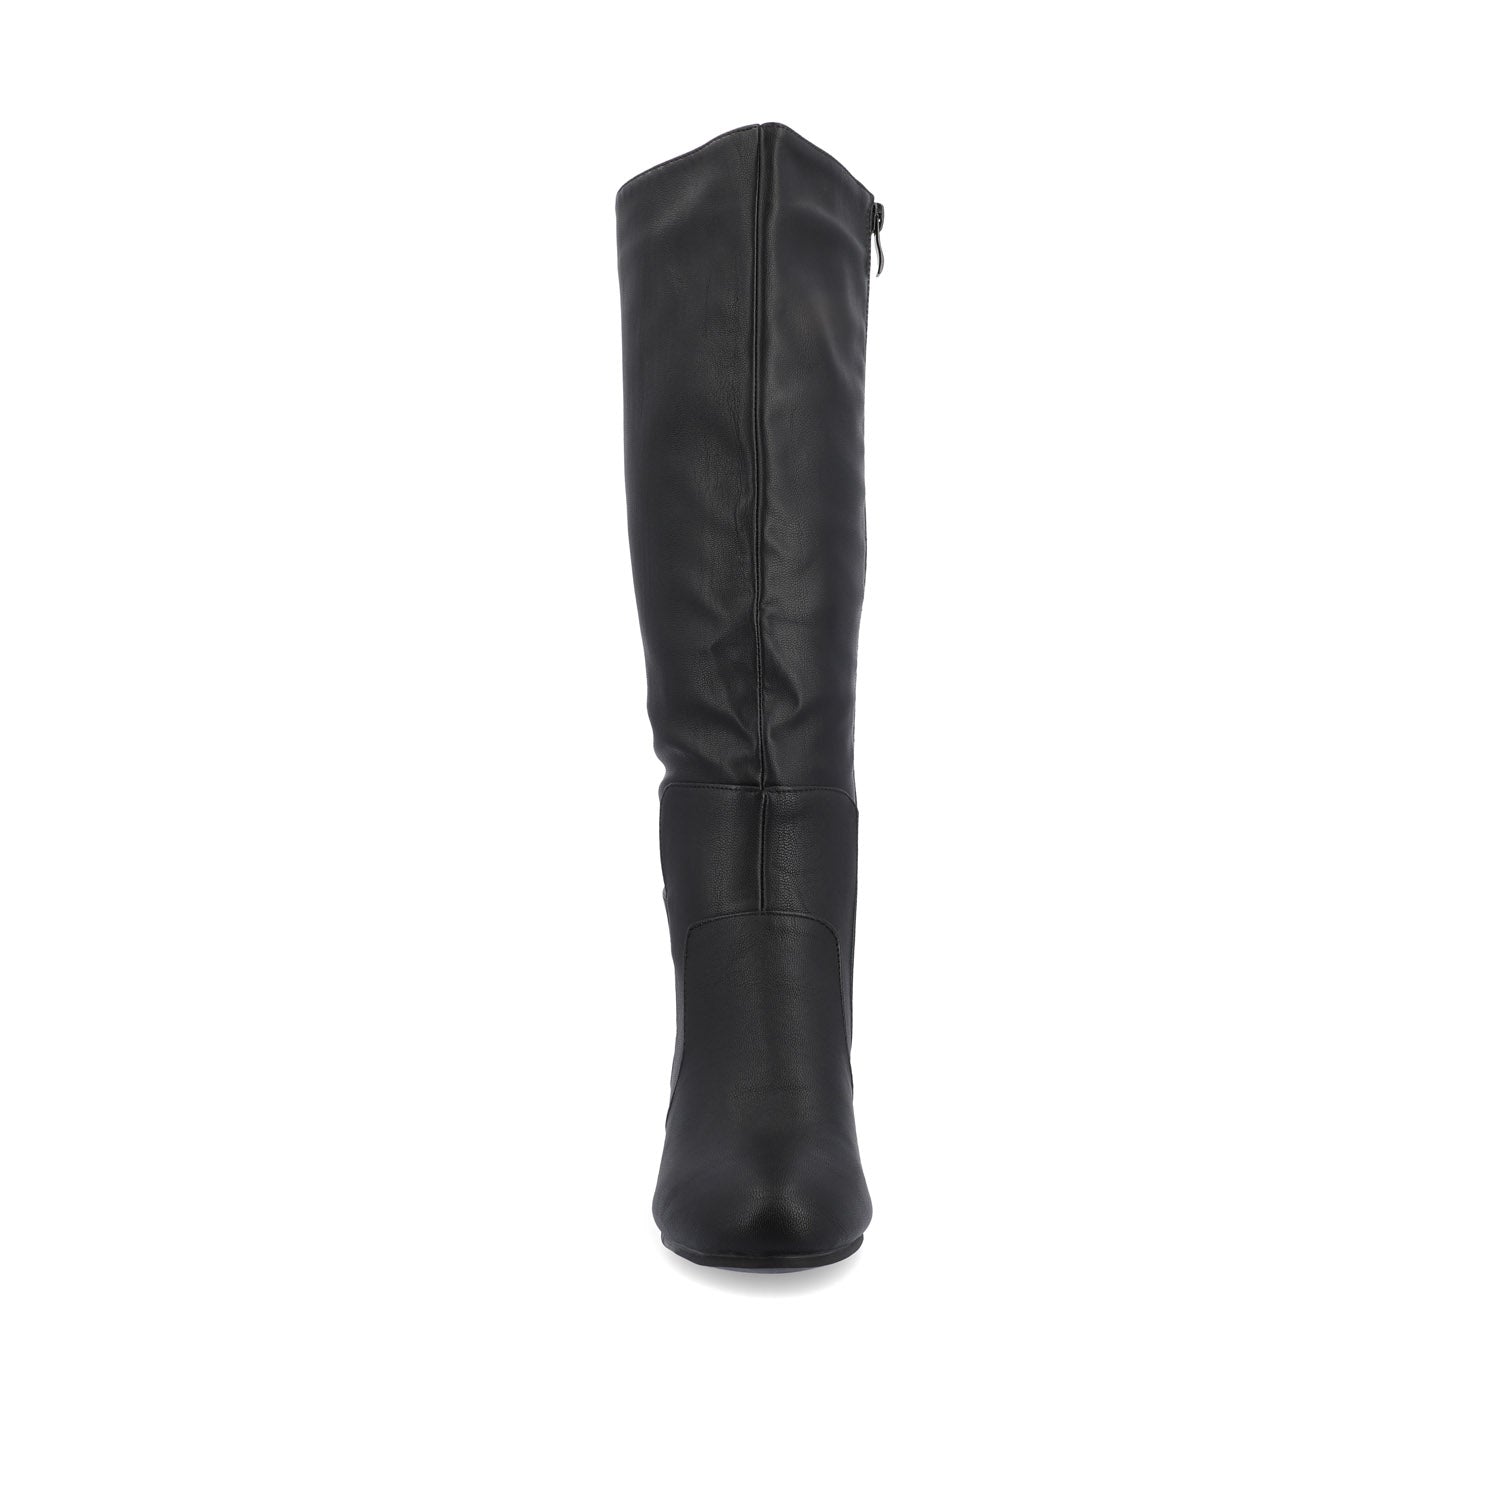 CARVER KNEE-HIGH BOOTS IN FAUX LEATHER